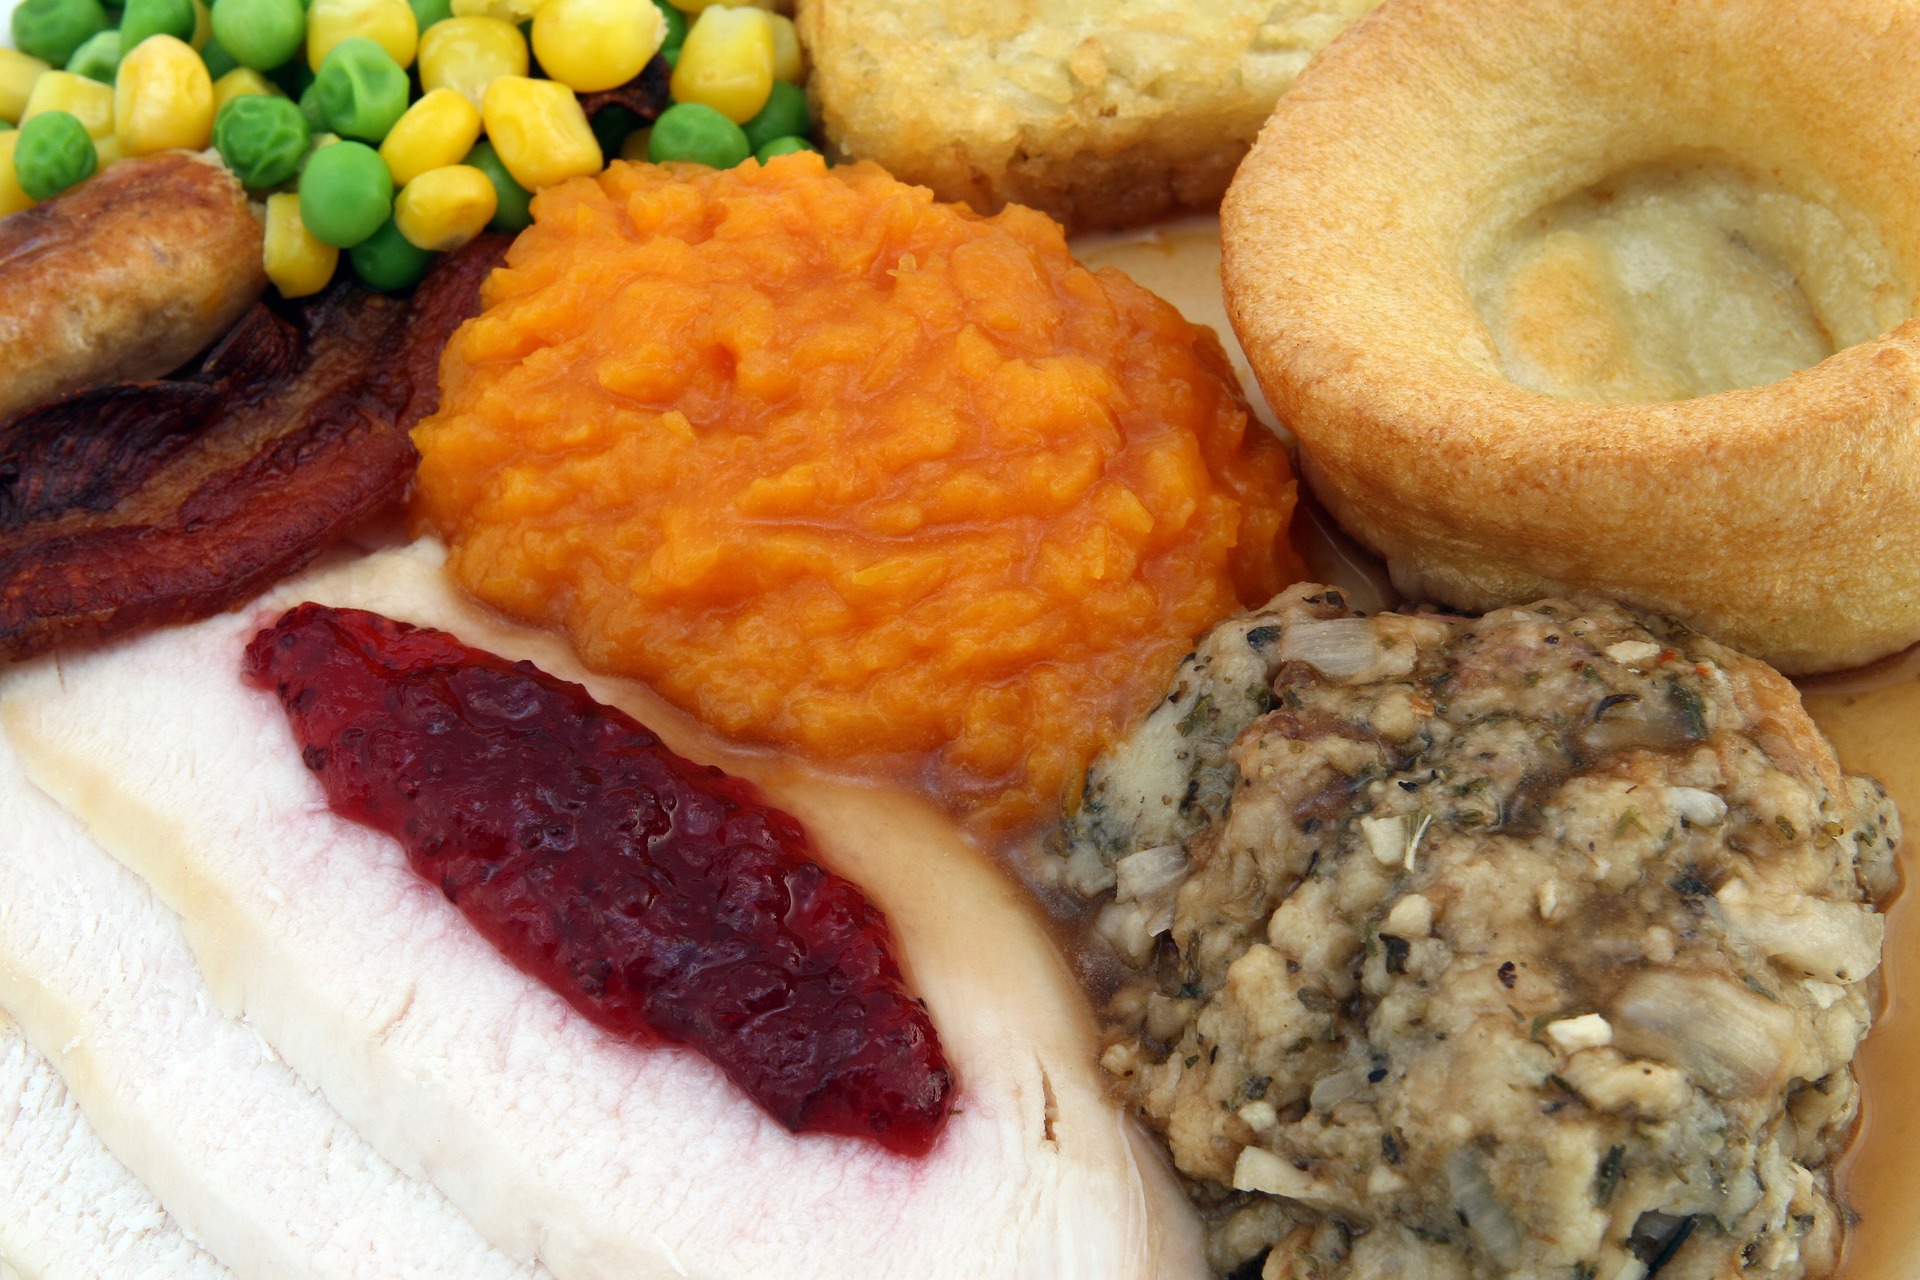 A plate filled with typical Thanksgiving food